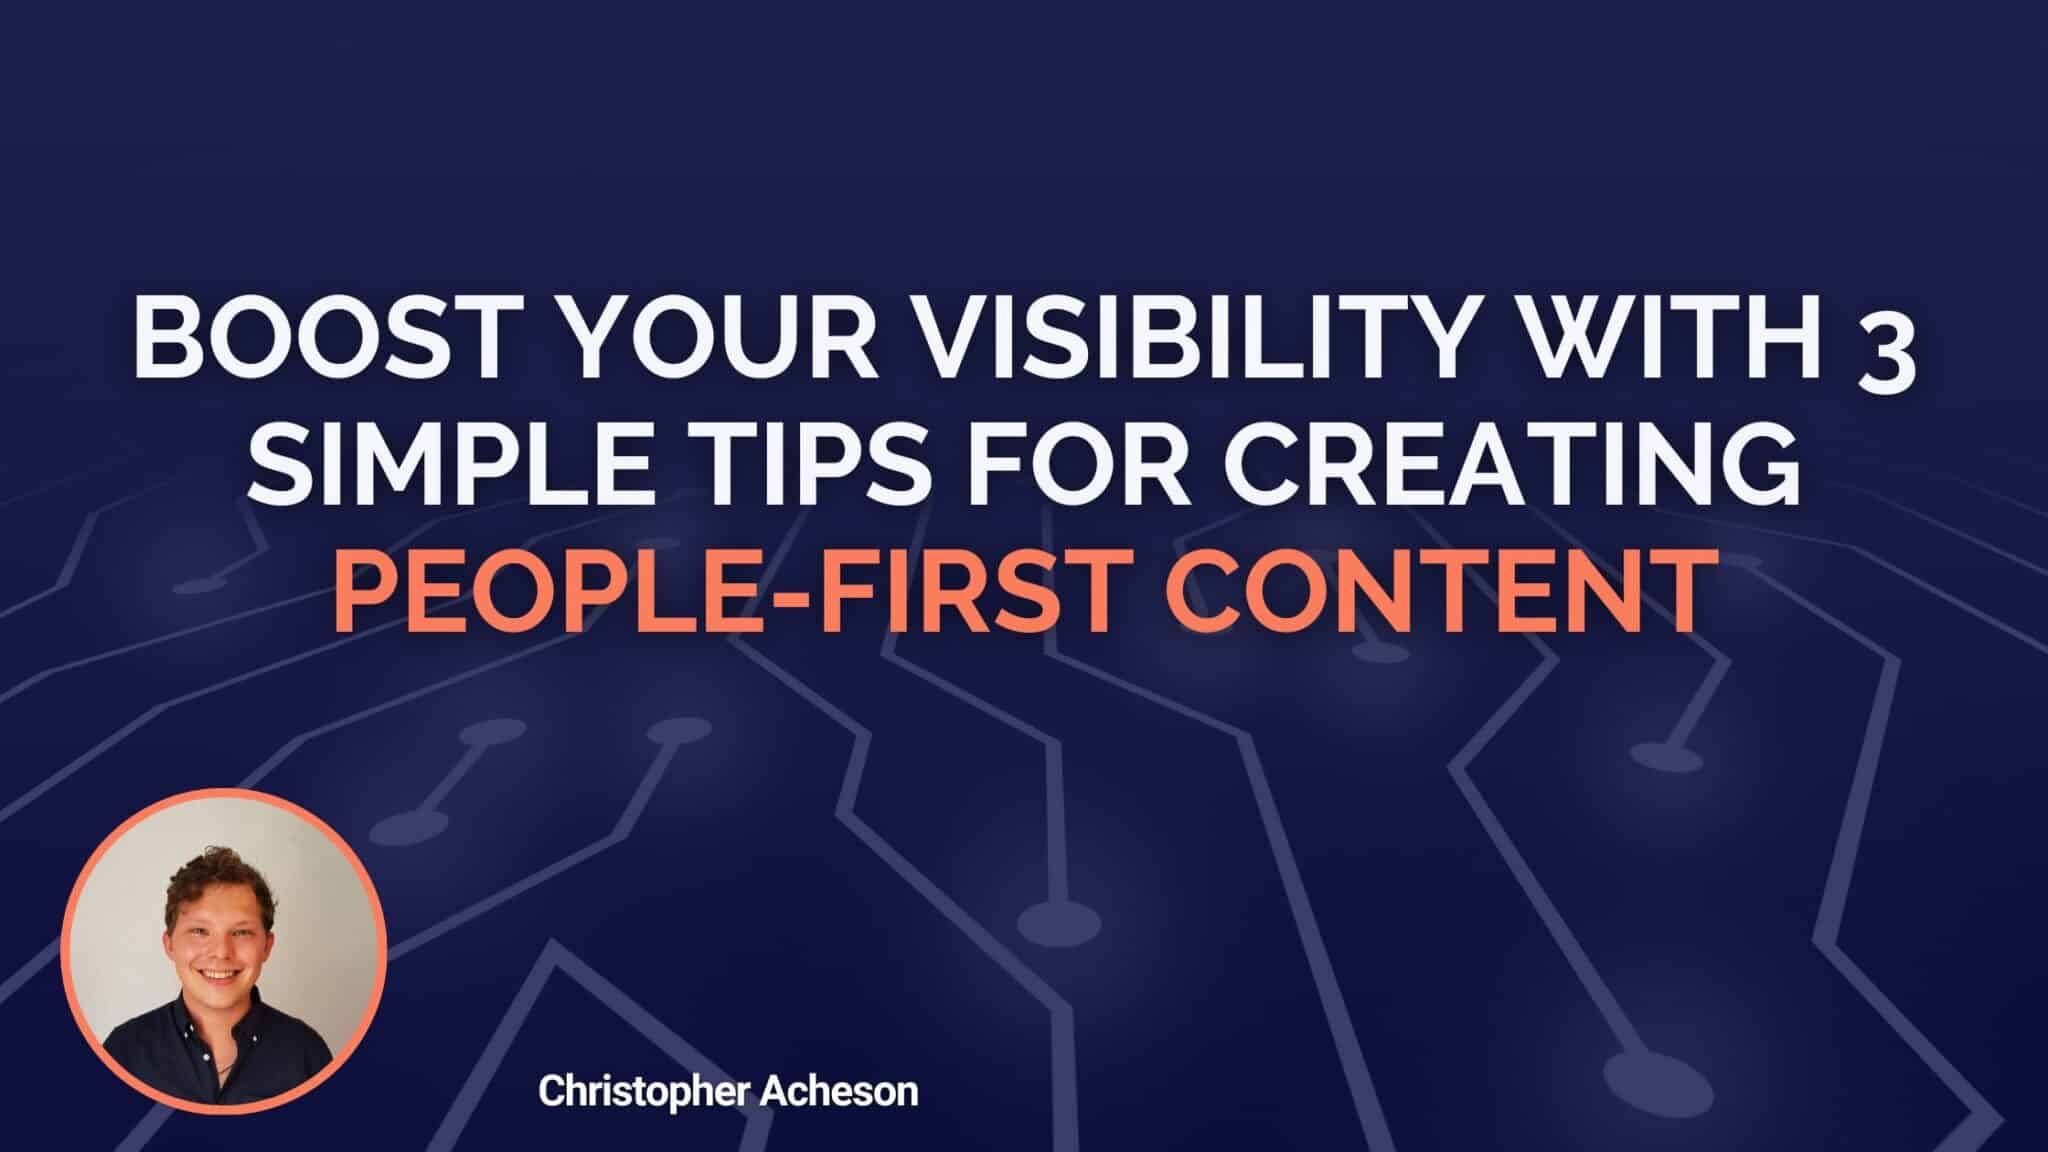 Boost Your Visibility With 3 Simple Tips For Creating People-First Content